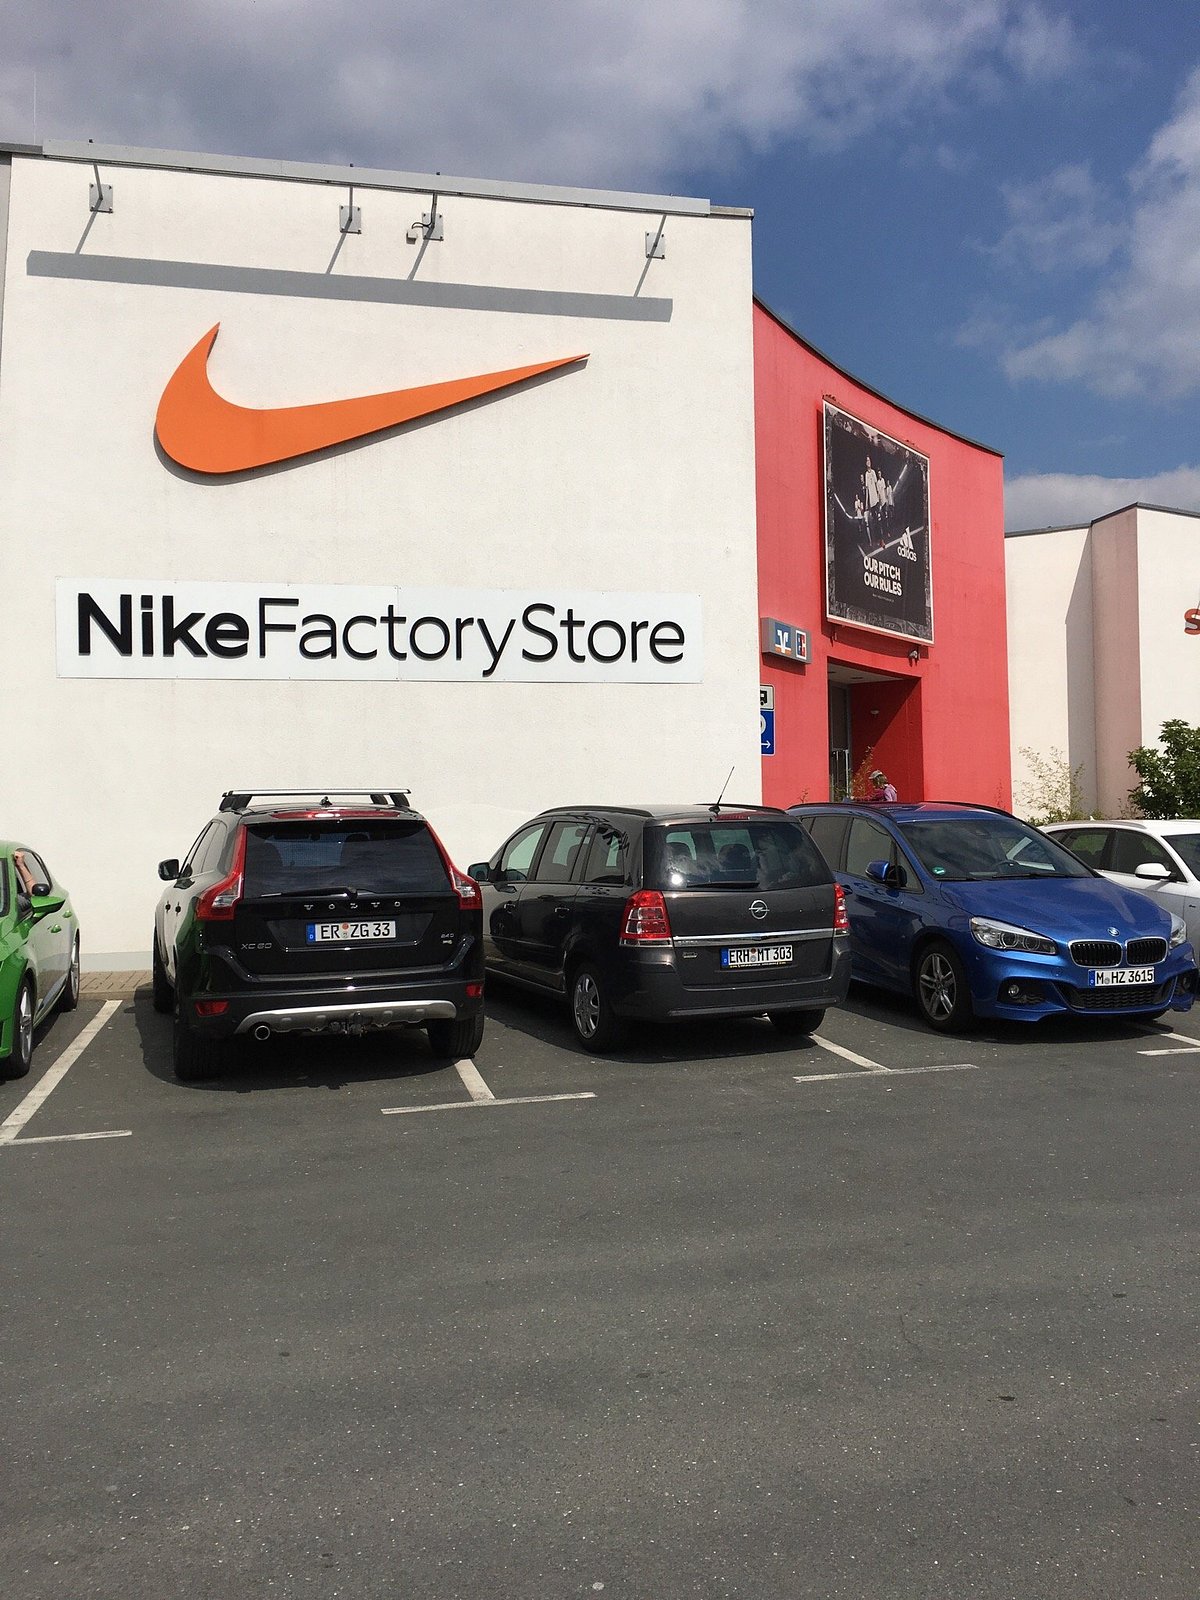 Nike Factory Store (Herzogenaurach) All Need to Know You Go